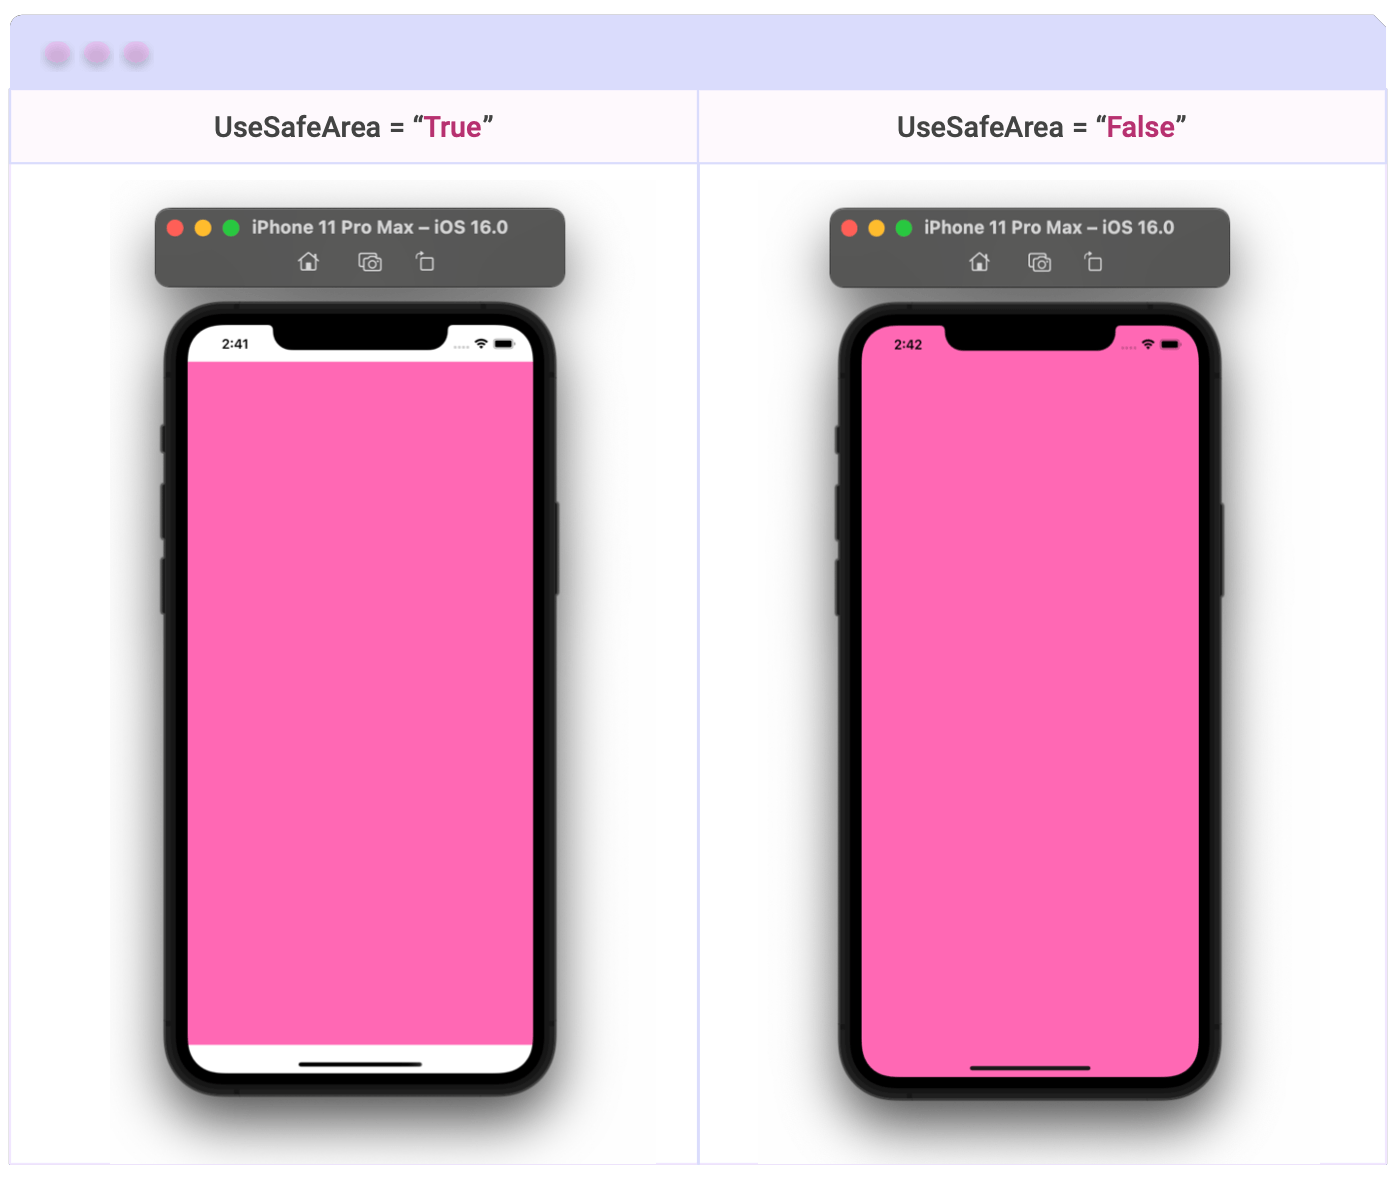 Two iPhone layouts. One has UseSafeArea set to true, and the very top and bottom margins of the phone show gray instead of pink. The other has UseSafeArea set to false and the pink extends the entire area of the display